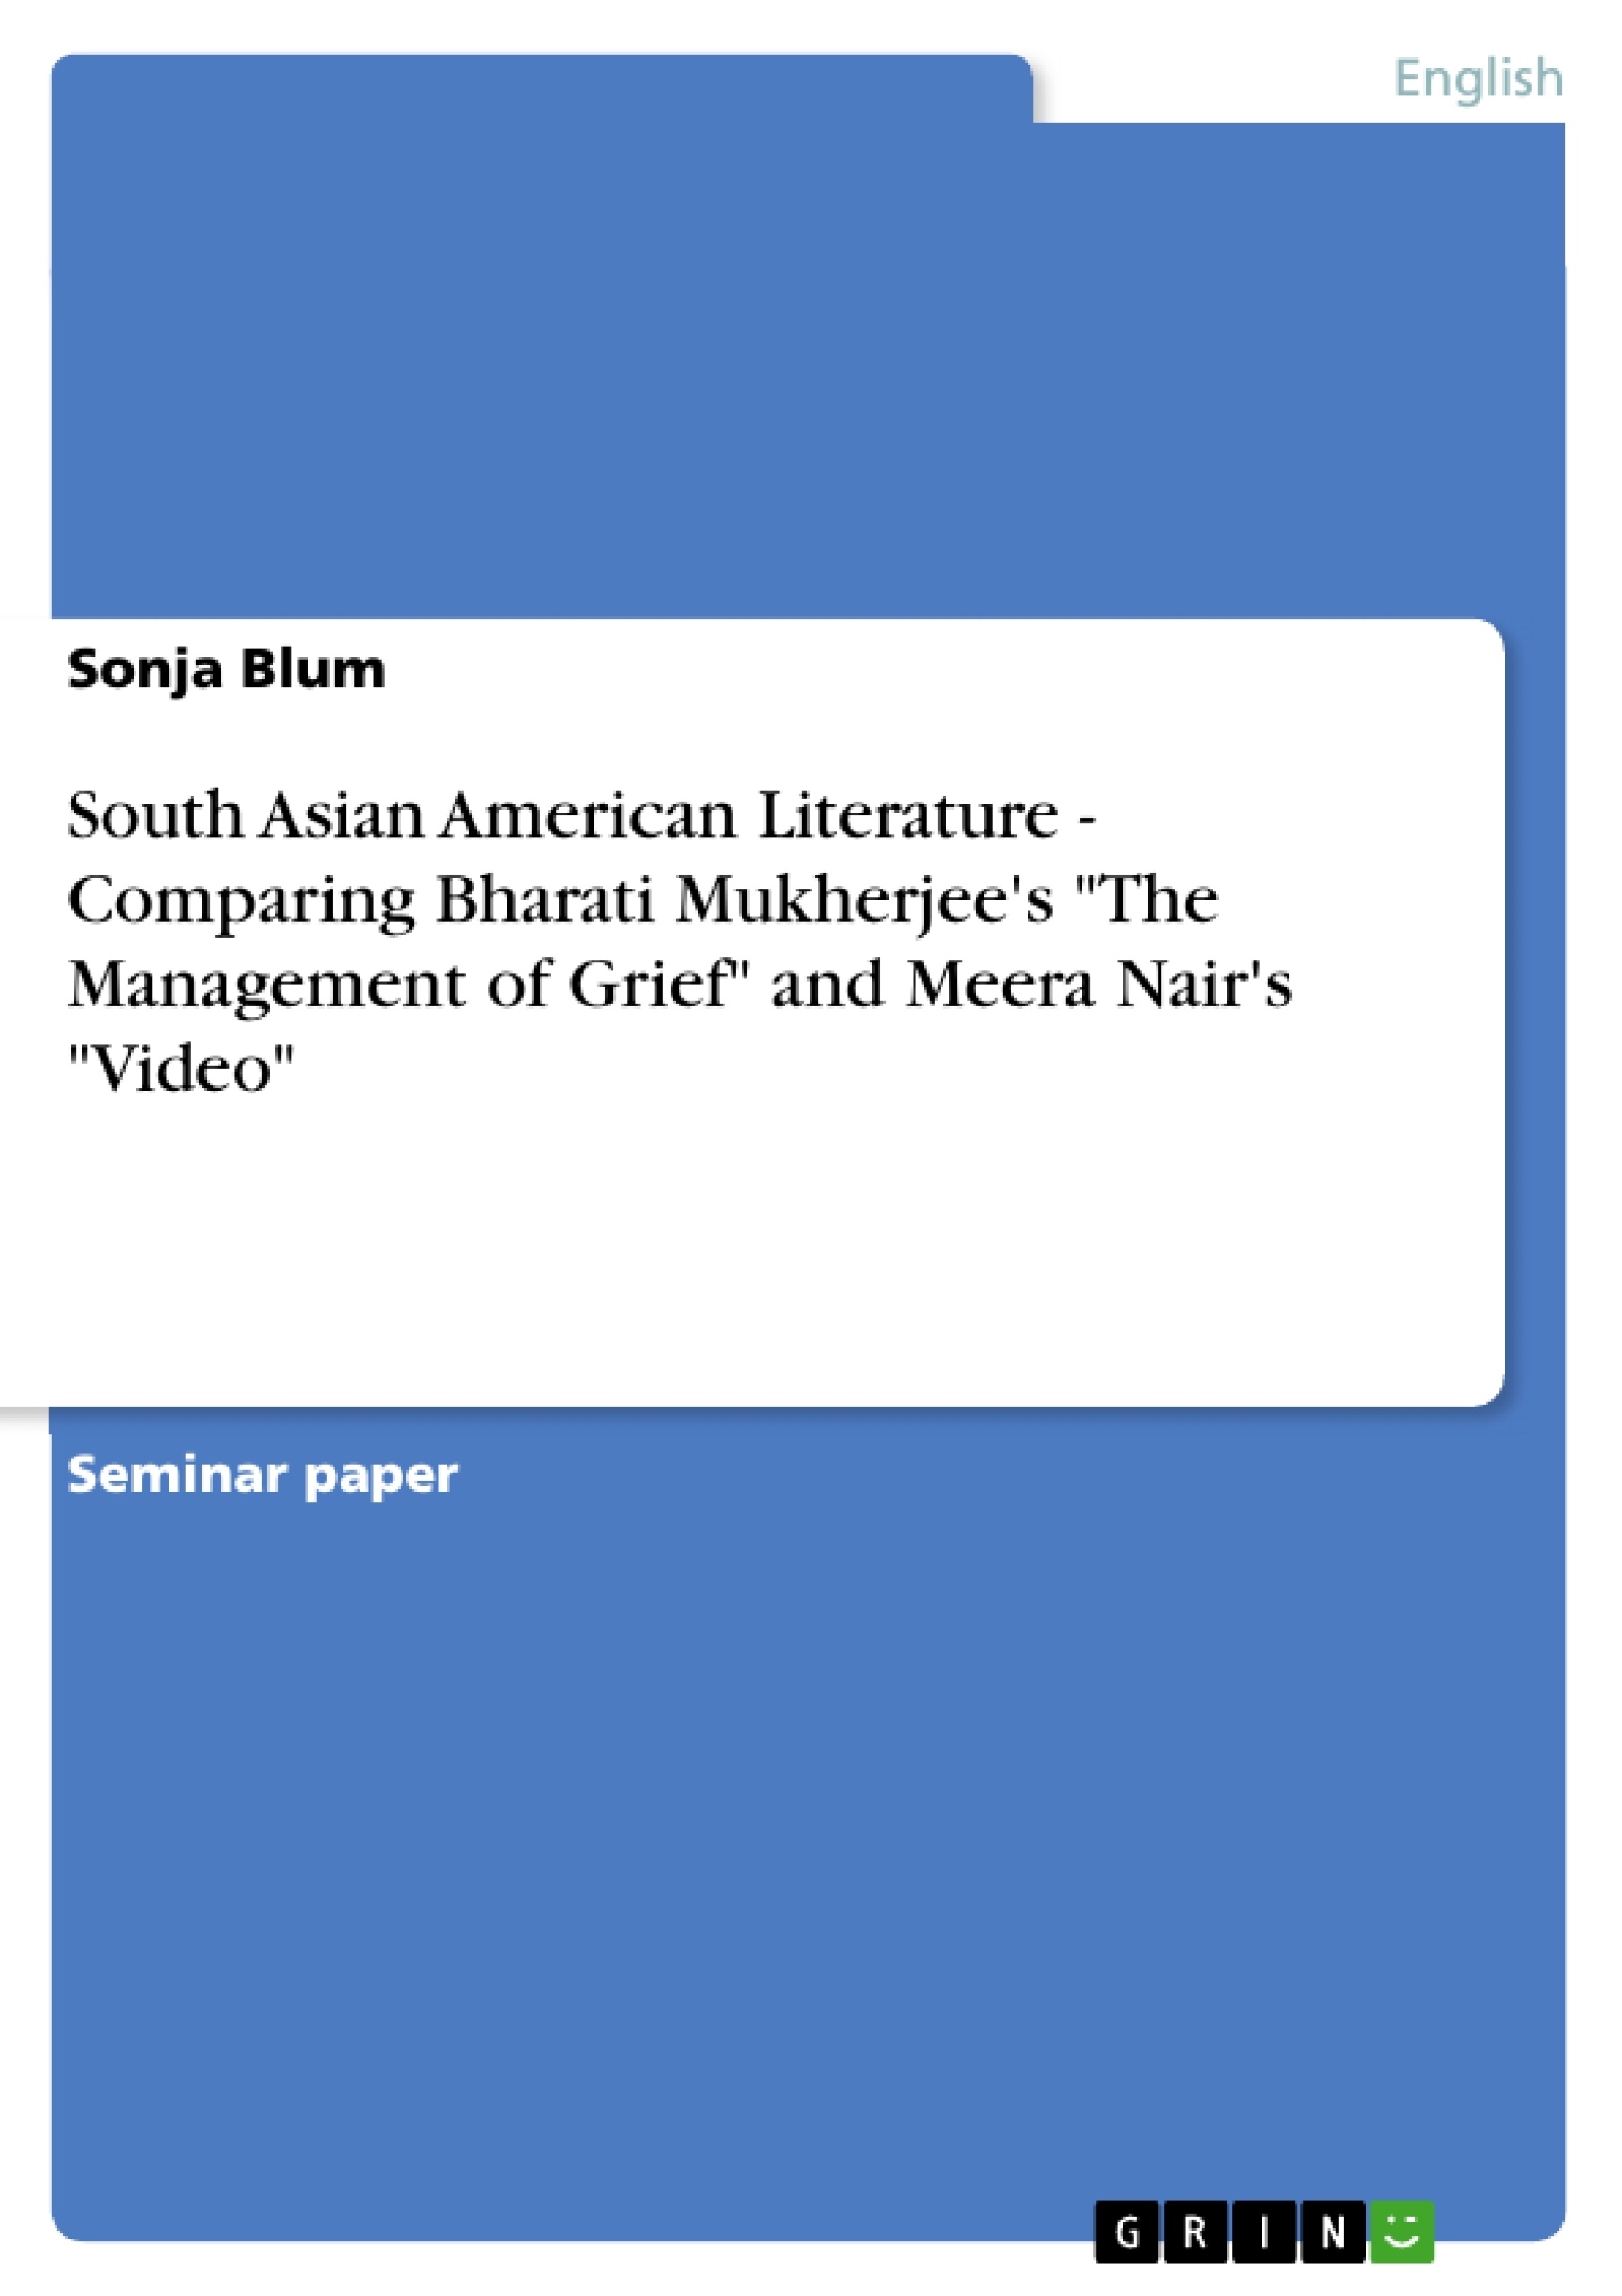 Titre: South Asian American Literature - Comparing Bharati Mukherjee's "The Management of Grief" and Meera Nair's "Video"